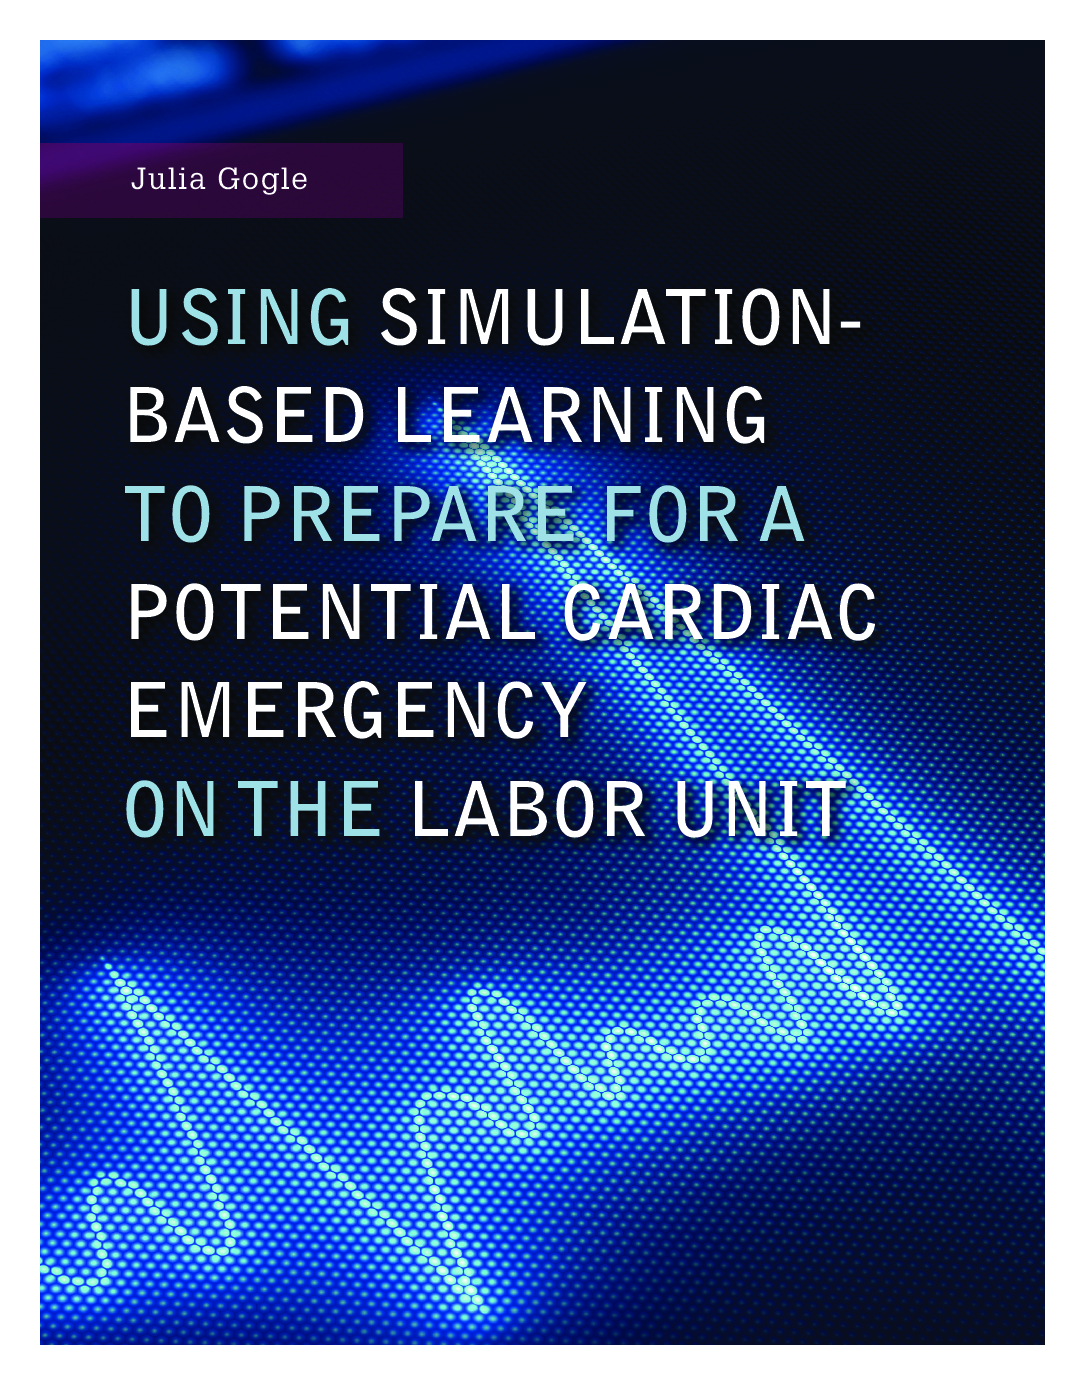 Using Simulation-Based Learning to Prepare for a Potential Cardiac Emergency on the Labor Unit